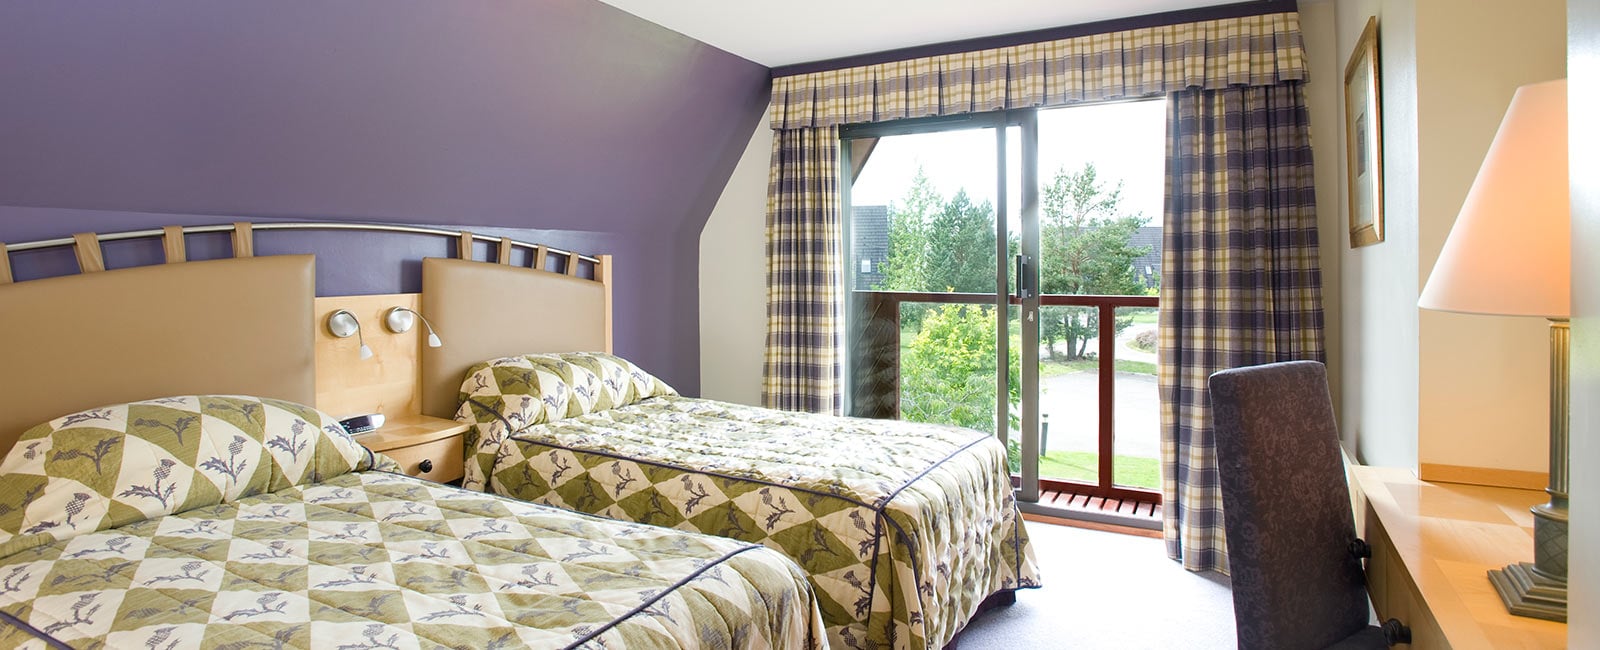 Bedroom at Hilton Grand Vacations Club at Coylumbridge in Inverness-shire, Scotland